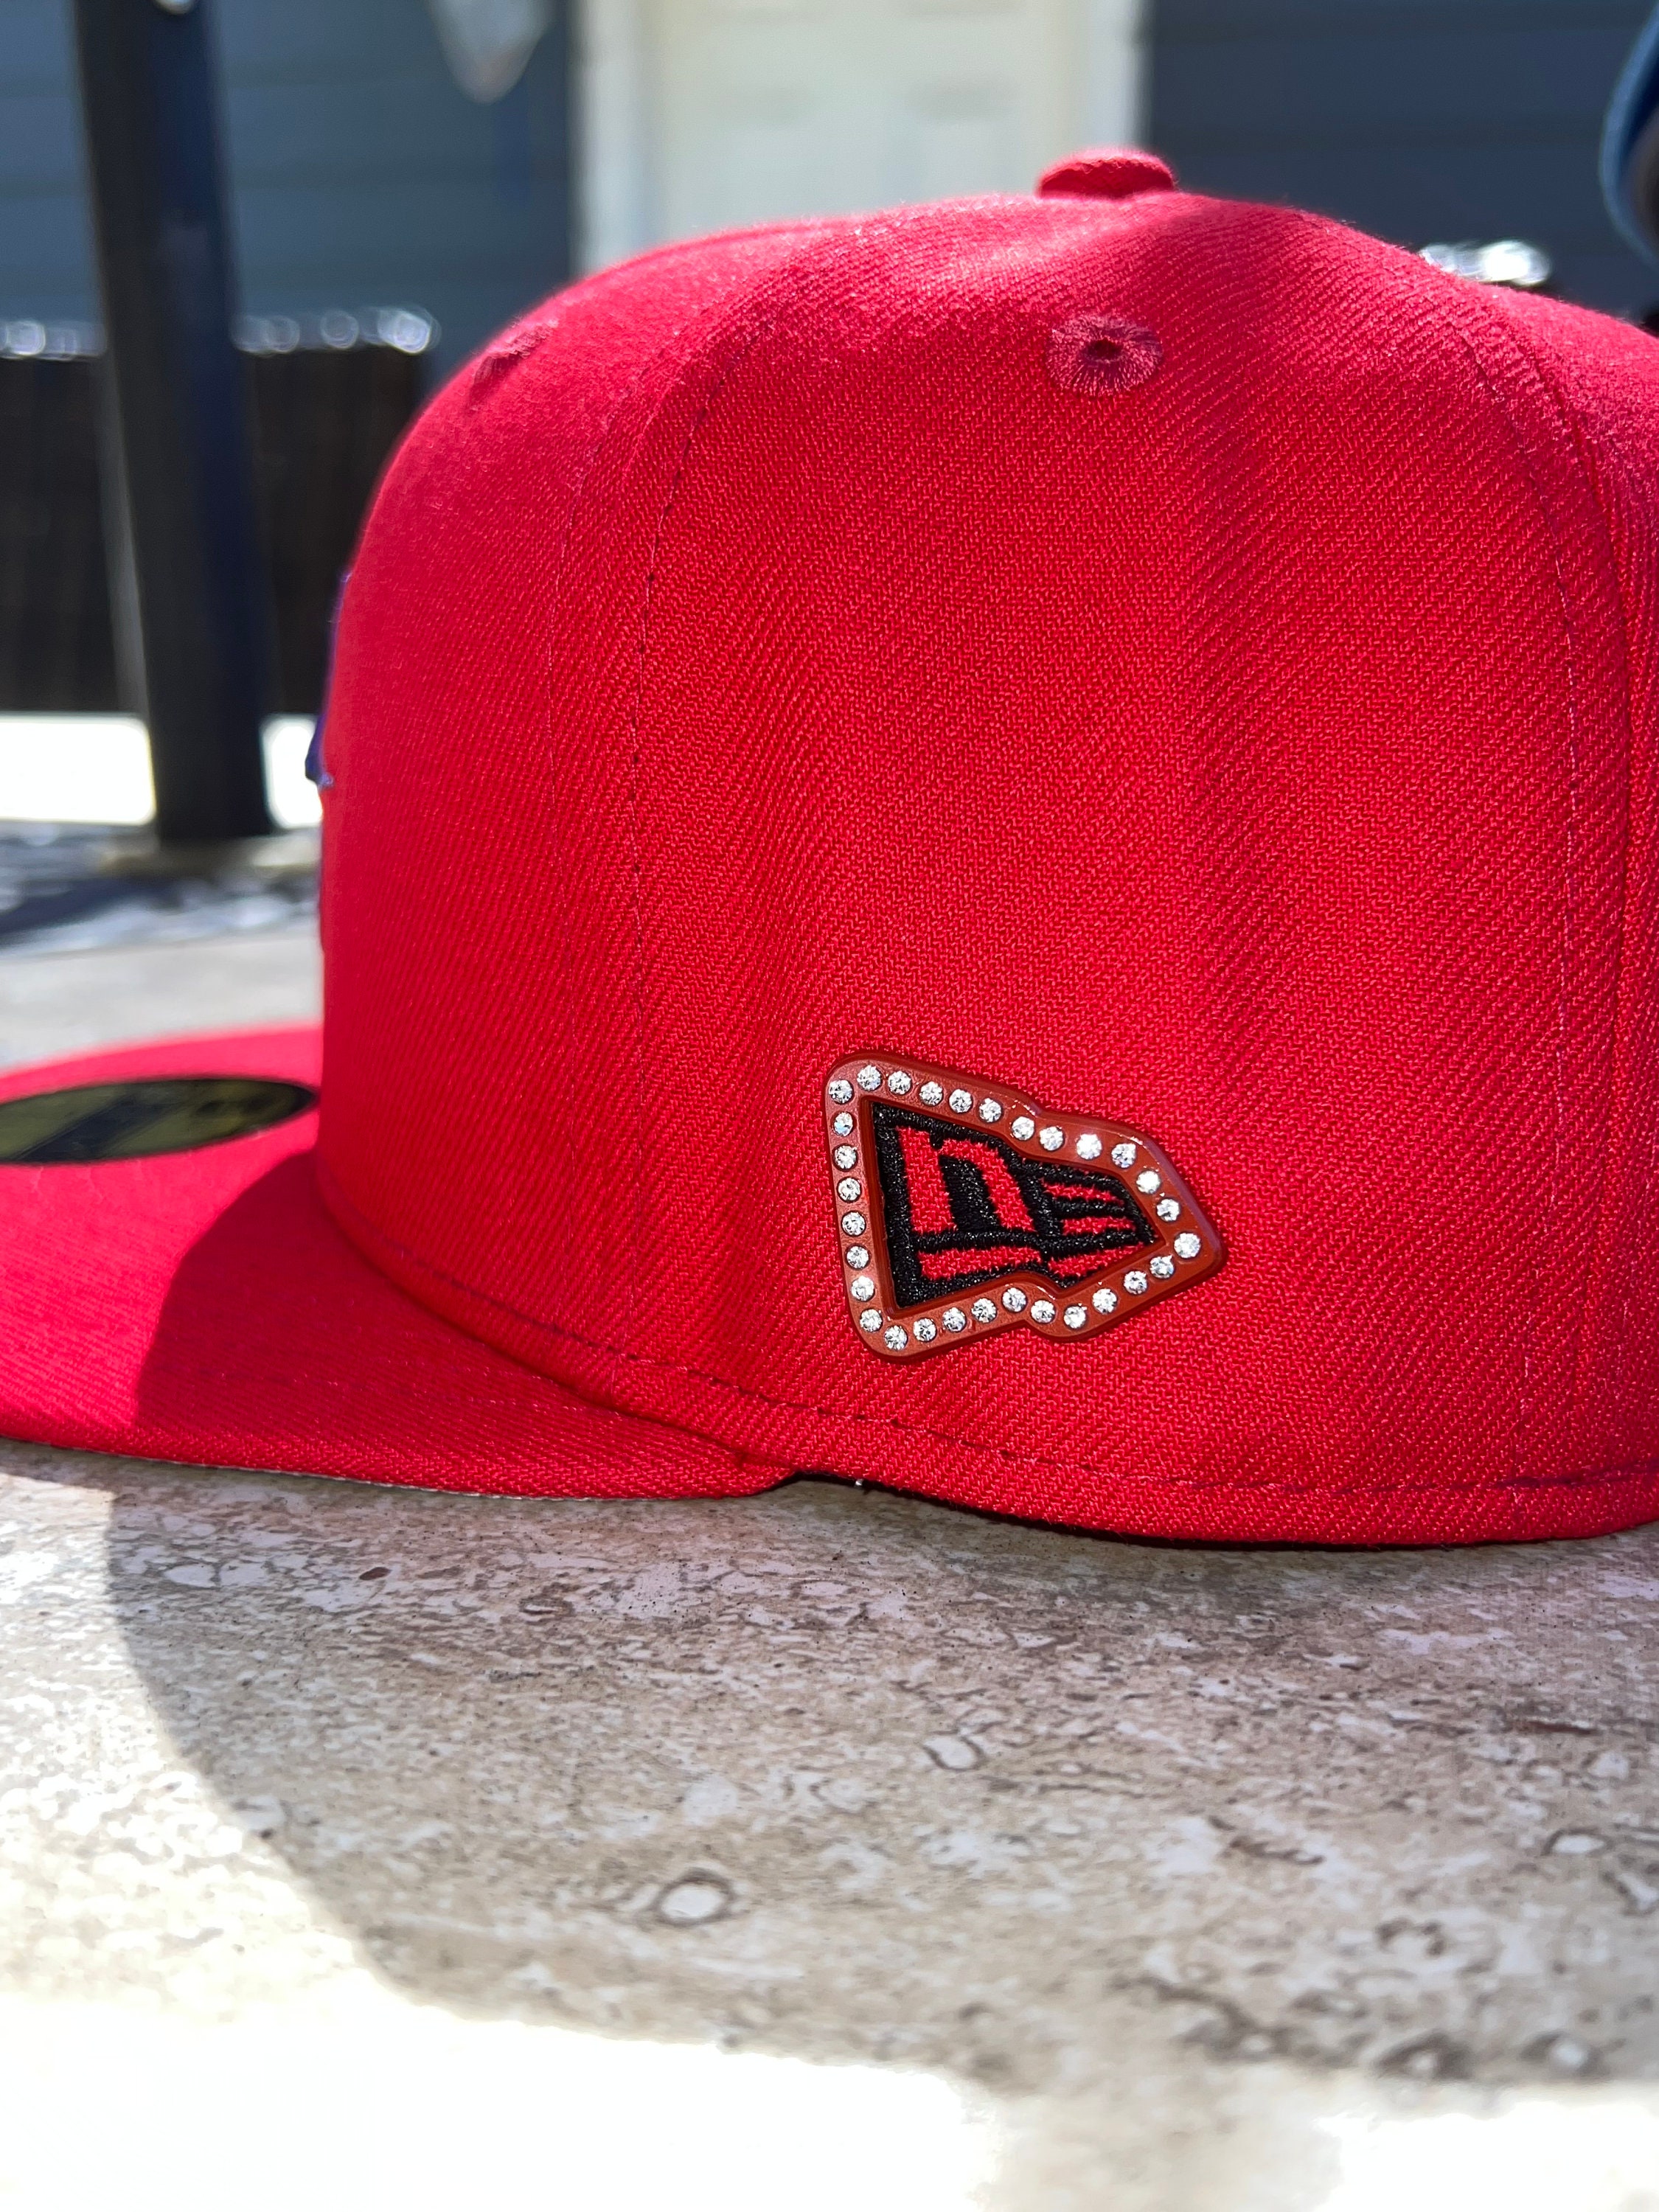 New Era Frame Fitted Hat Pin With Gems Blue Red Grey UNC - Etsy